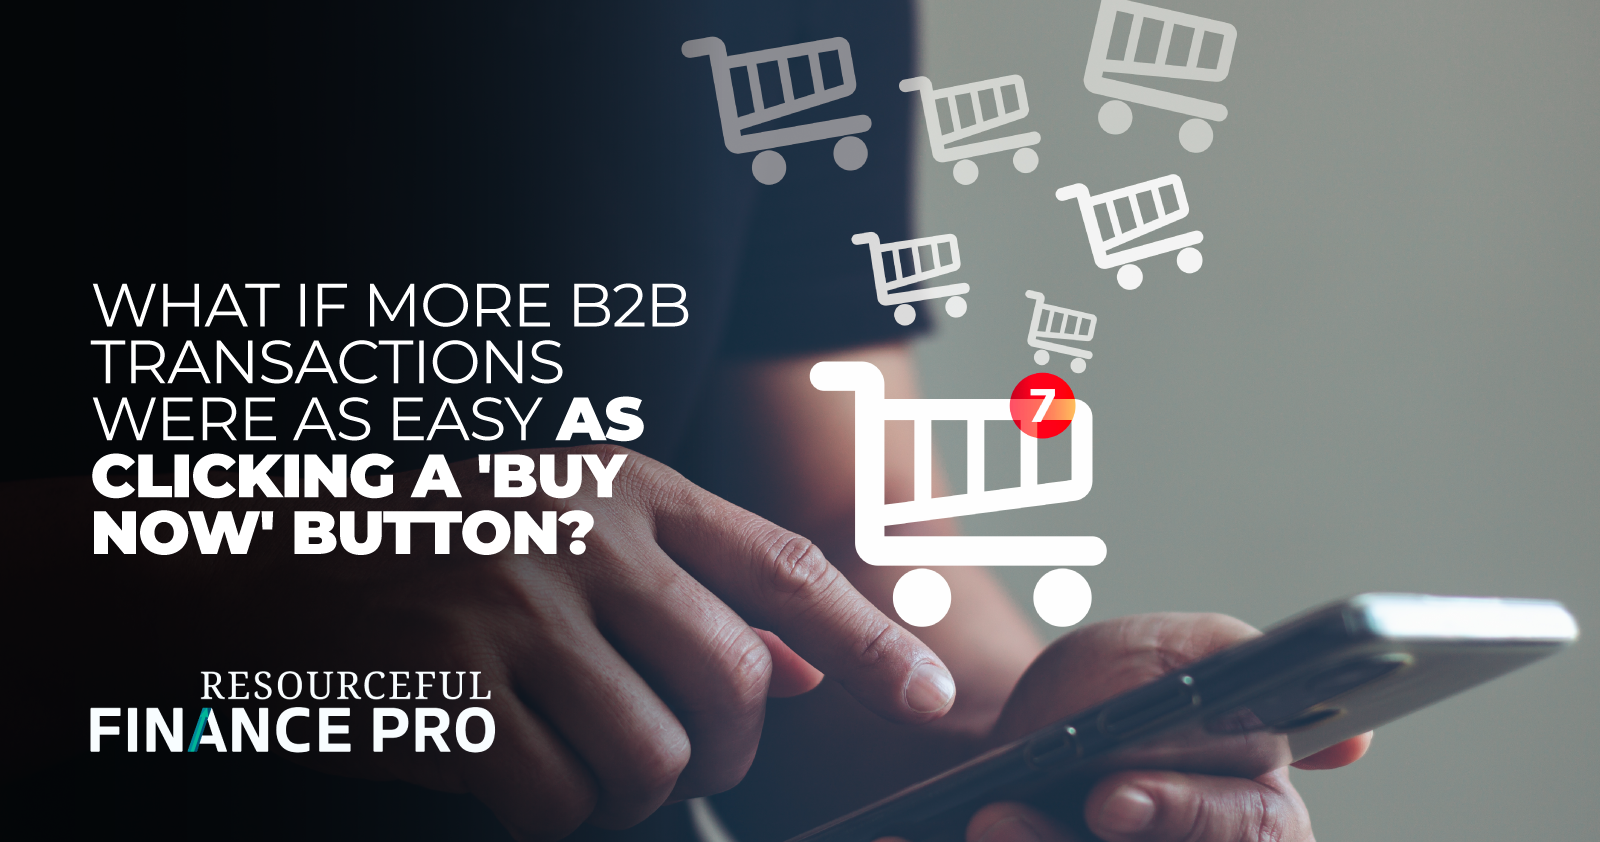 What if more B2B transactions were as easy as clicking a 'buy now' button?